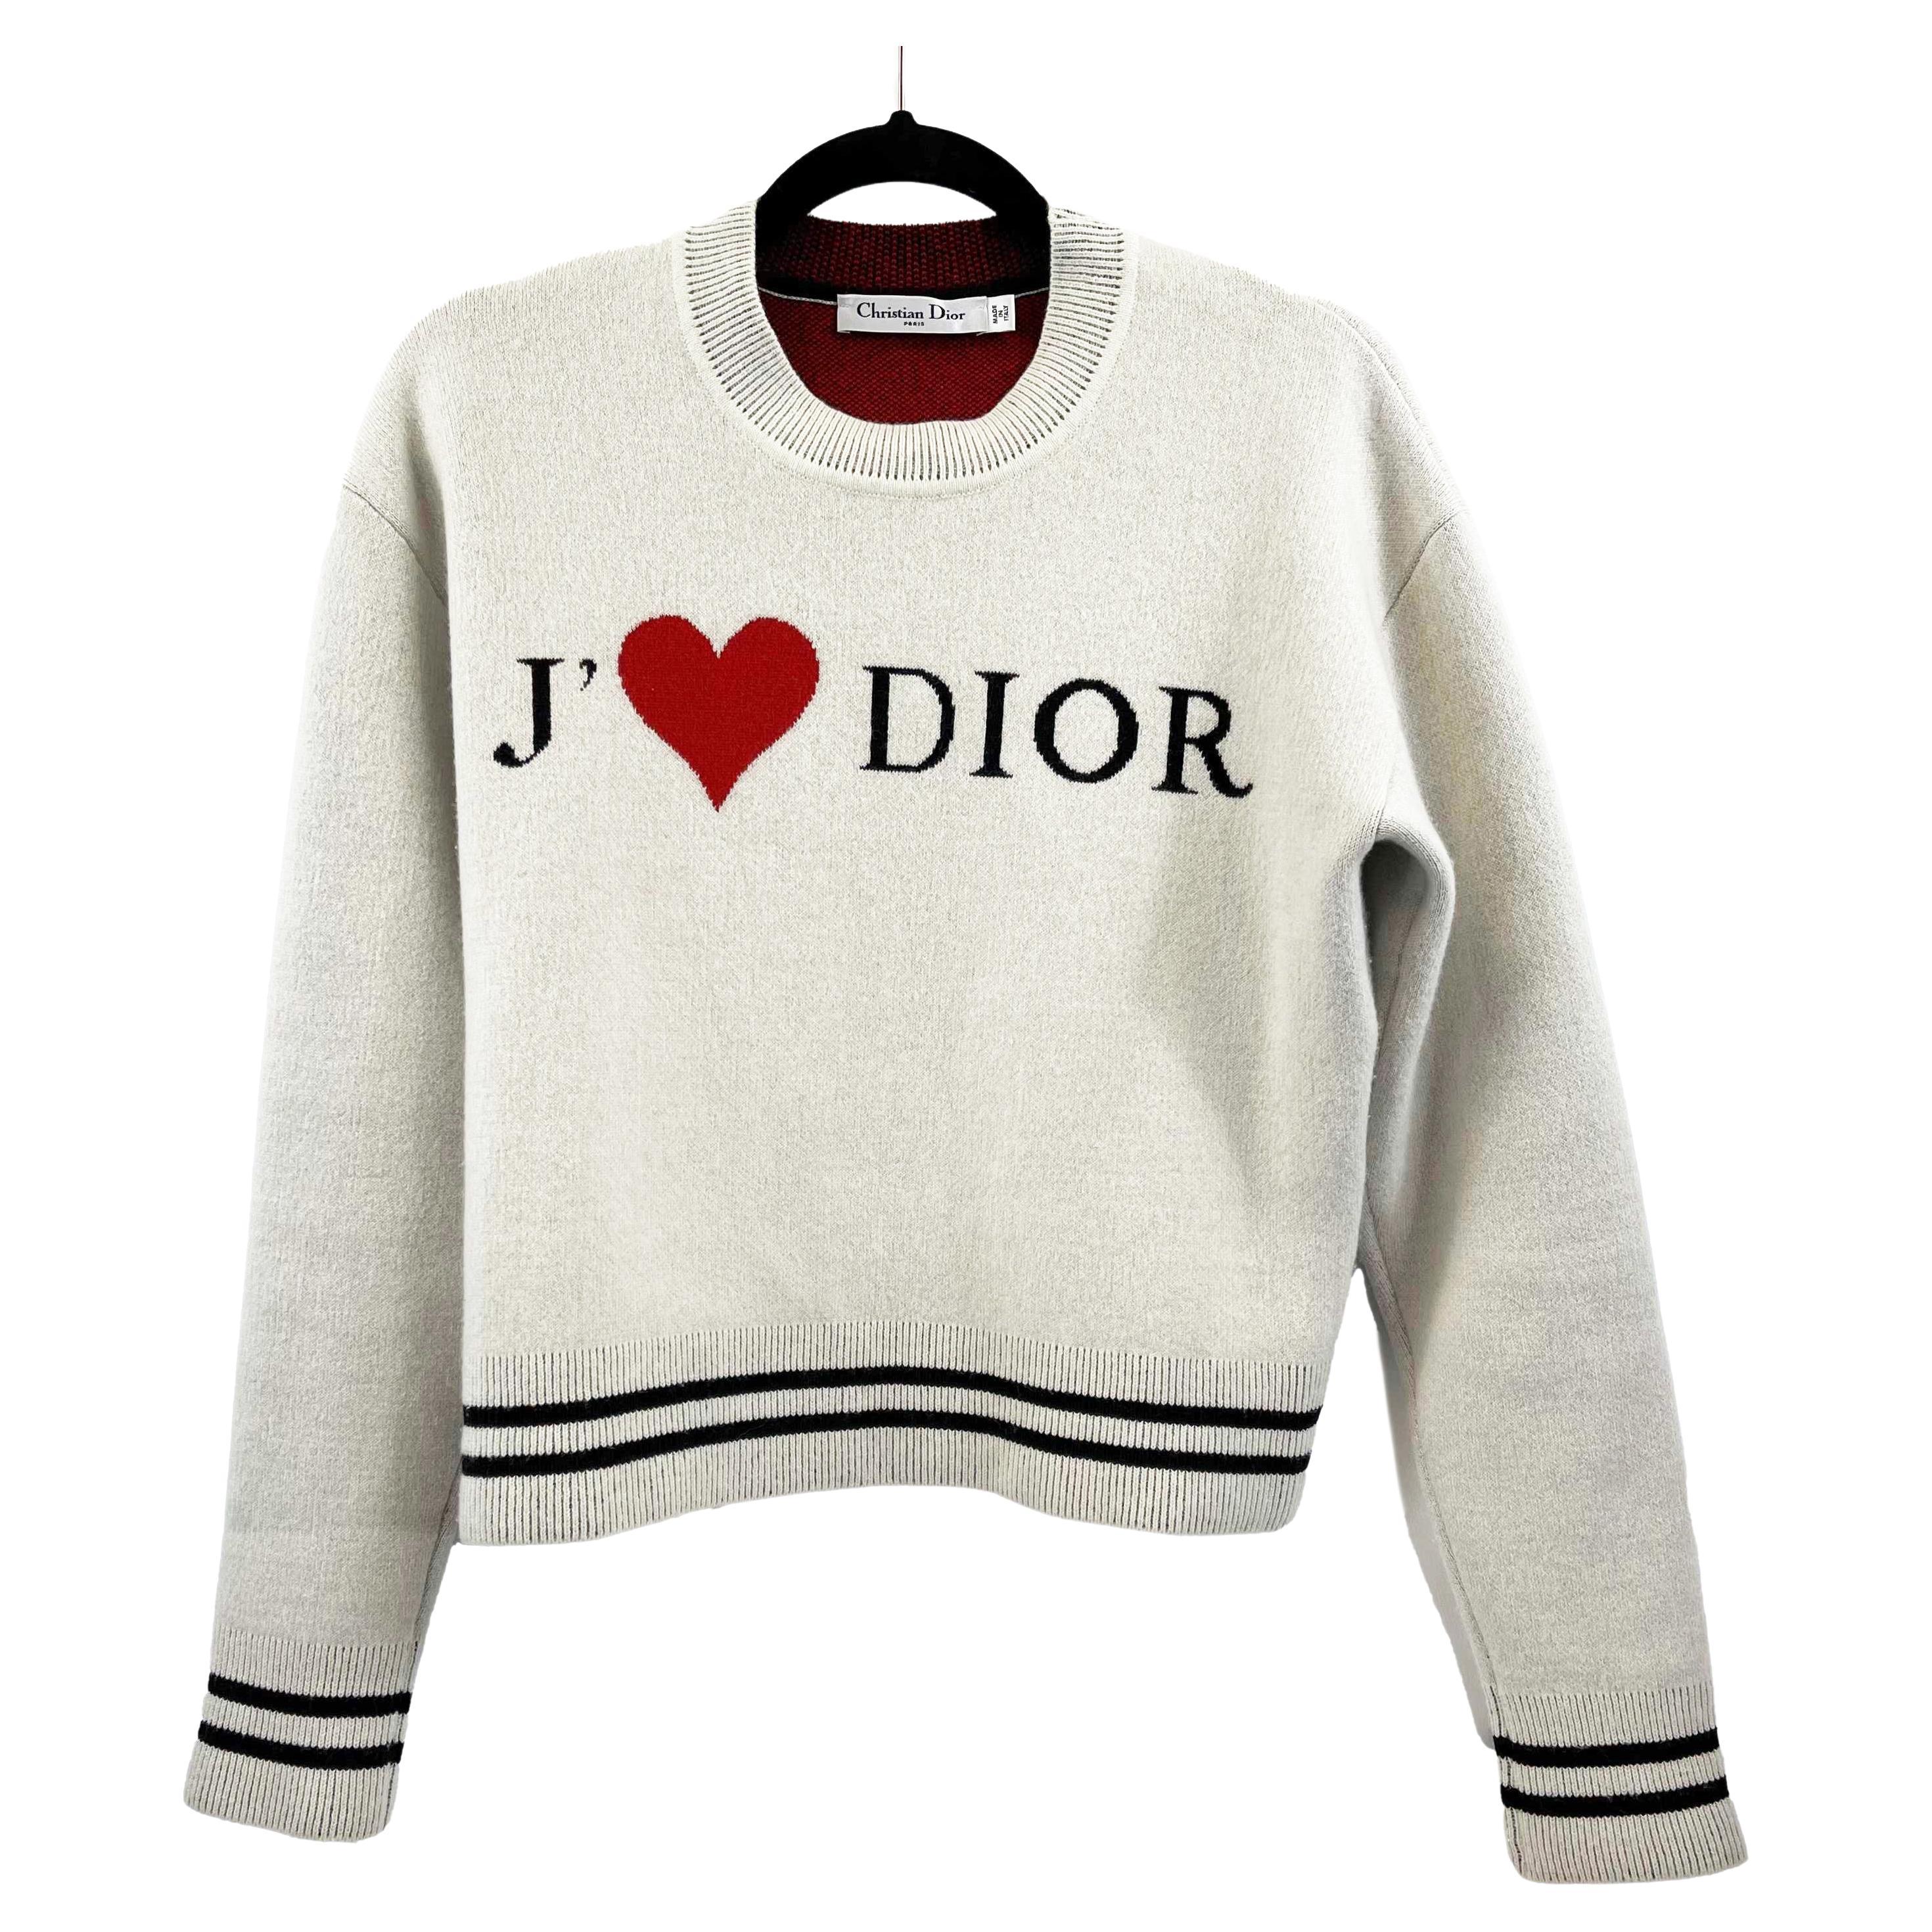 Christian Dior 2019 Dioramour Capsule Collection Sweater Ivory 34 US 2